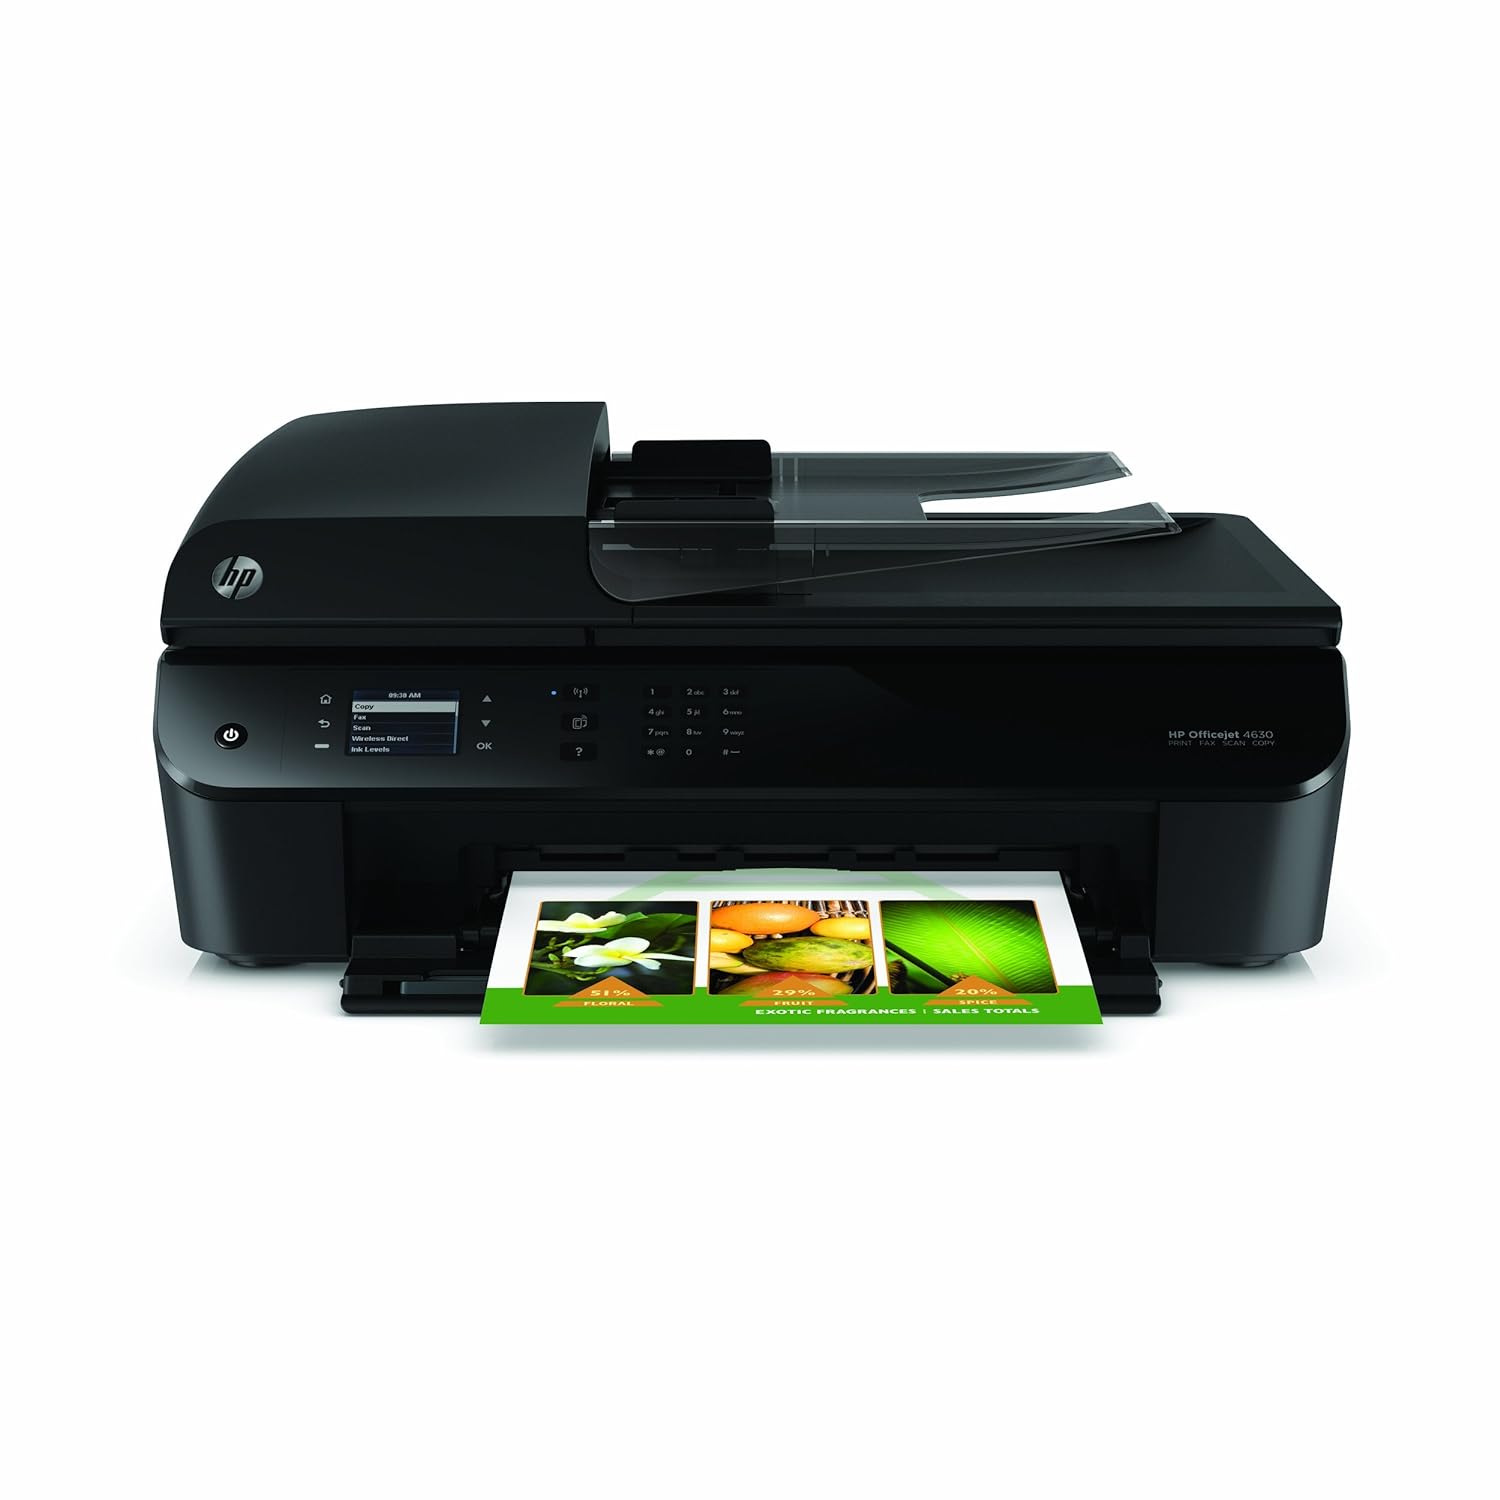 HP OJ 4630 Wireless Color Photo Printer with Scanner, Copier and Fax